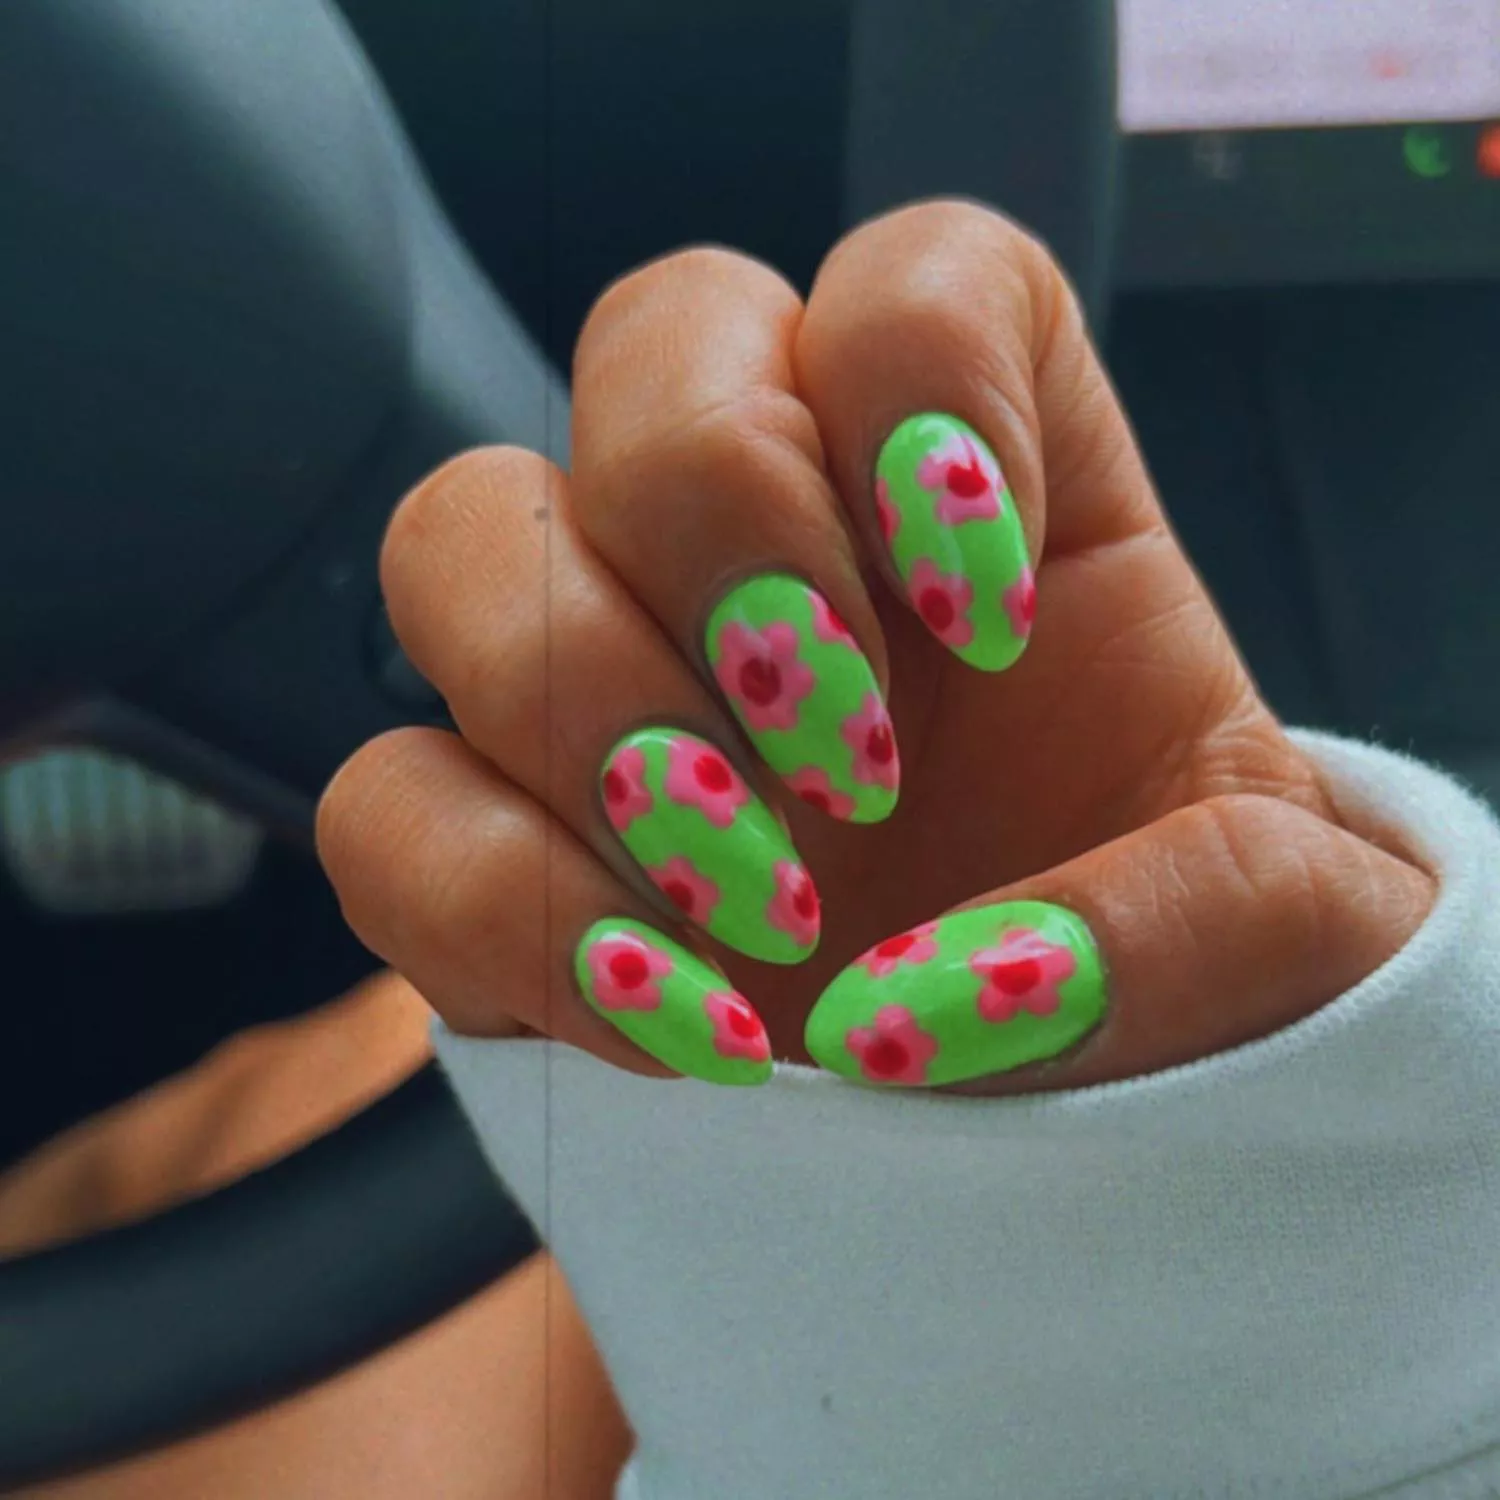 Neon green manicure with watermelon pink daisy nail designs